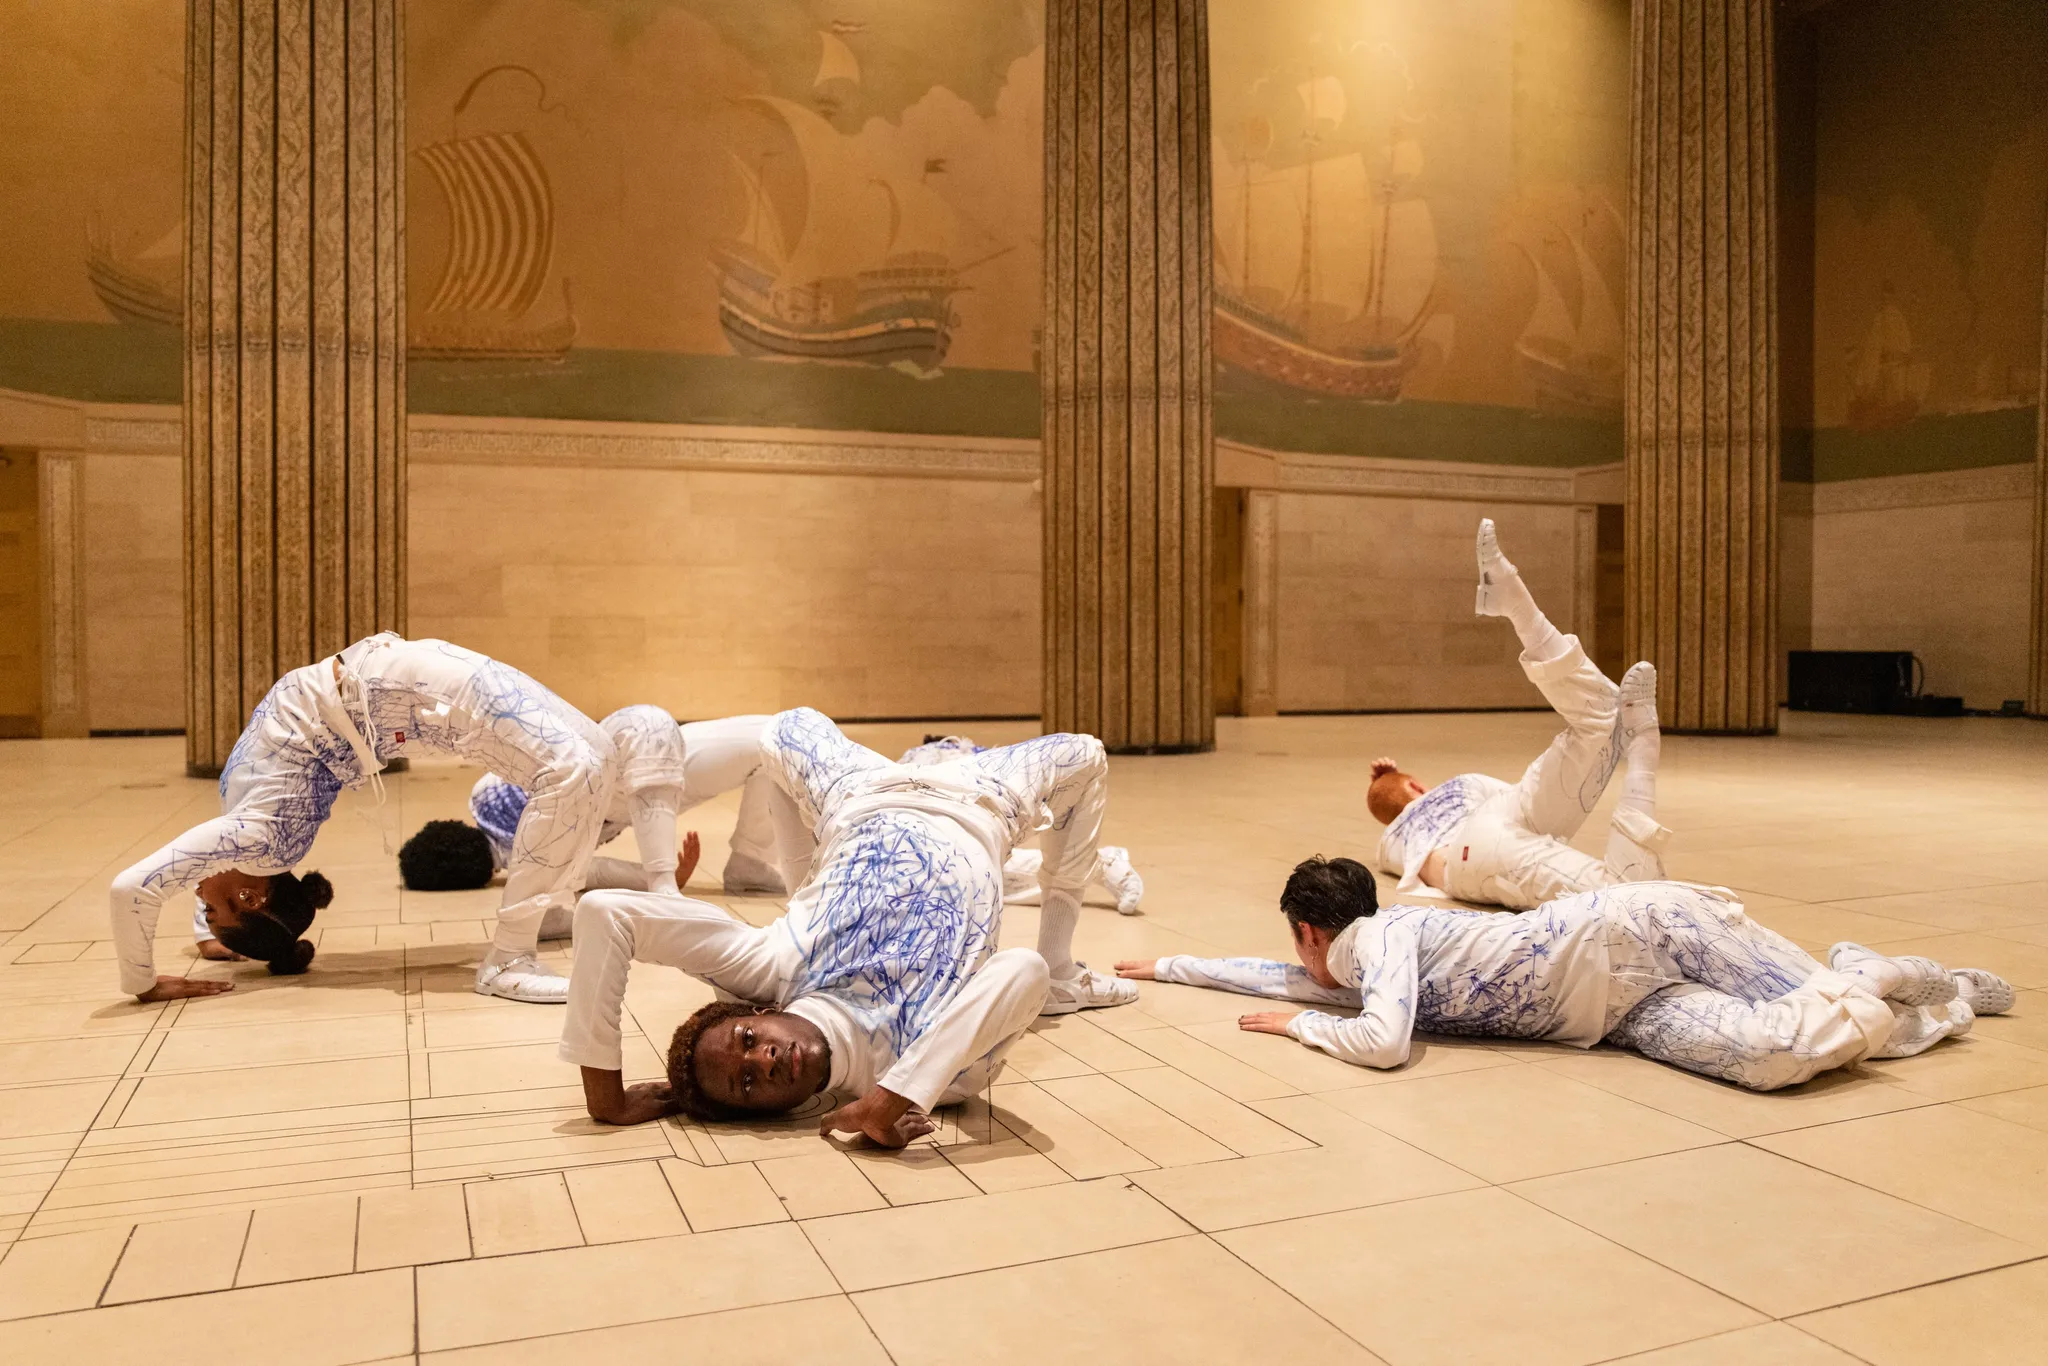 Six performers in assorted poses on the ballroom floor within a spacious environment adorned with pillars and wall paintings portraying ships